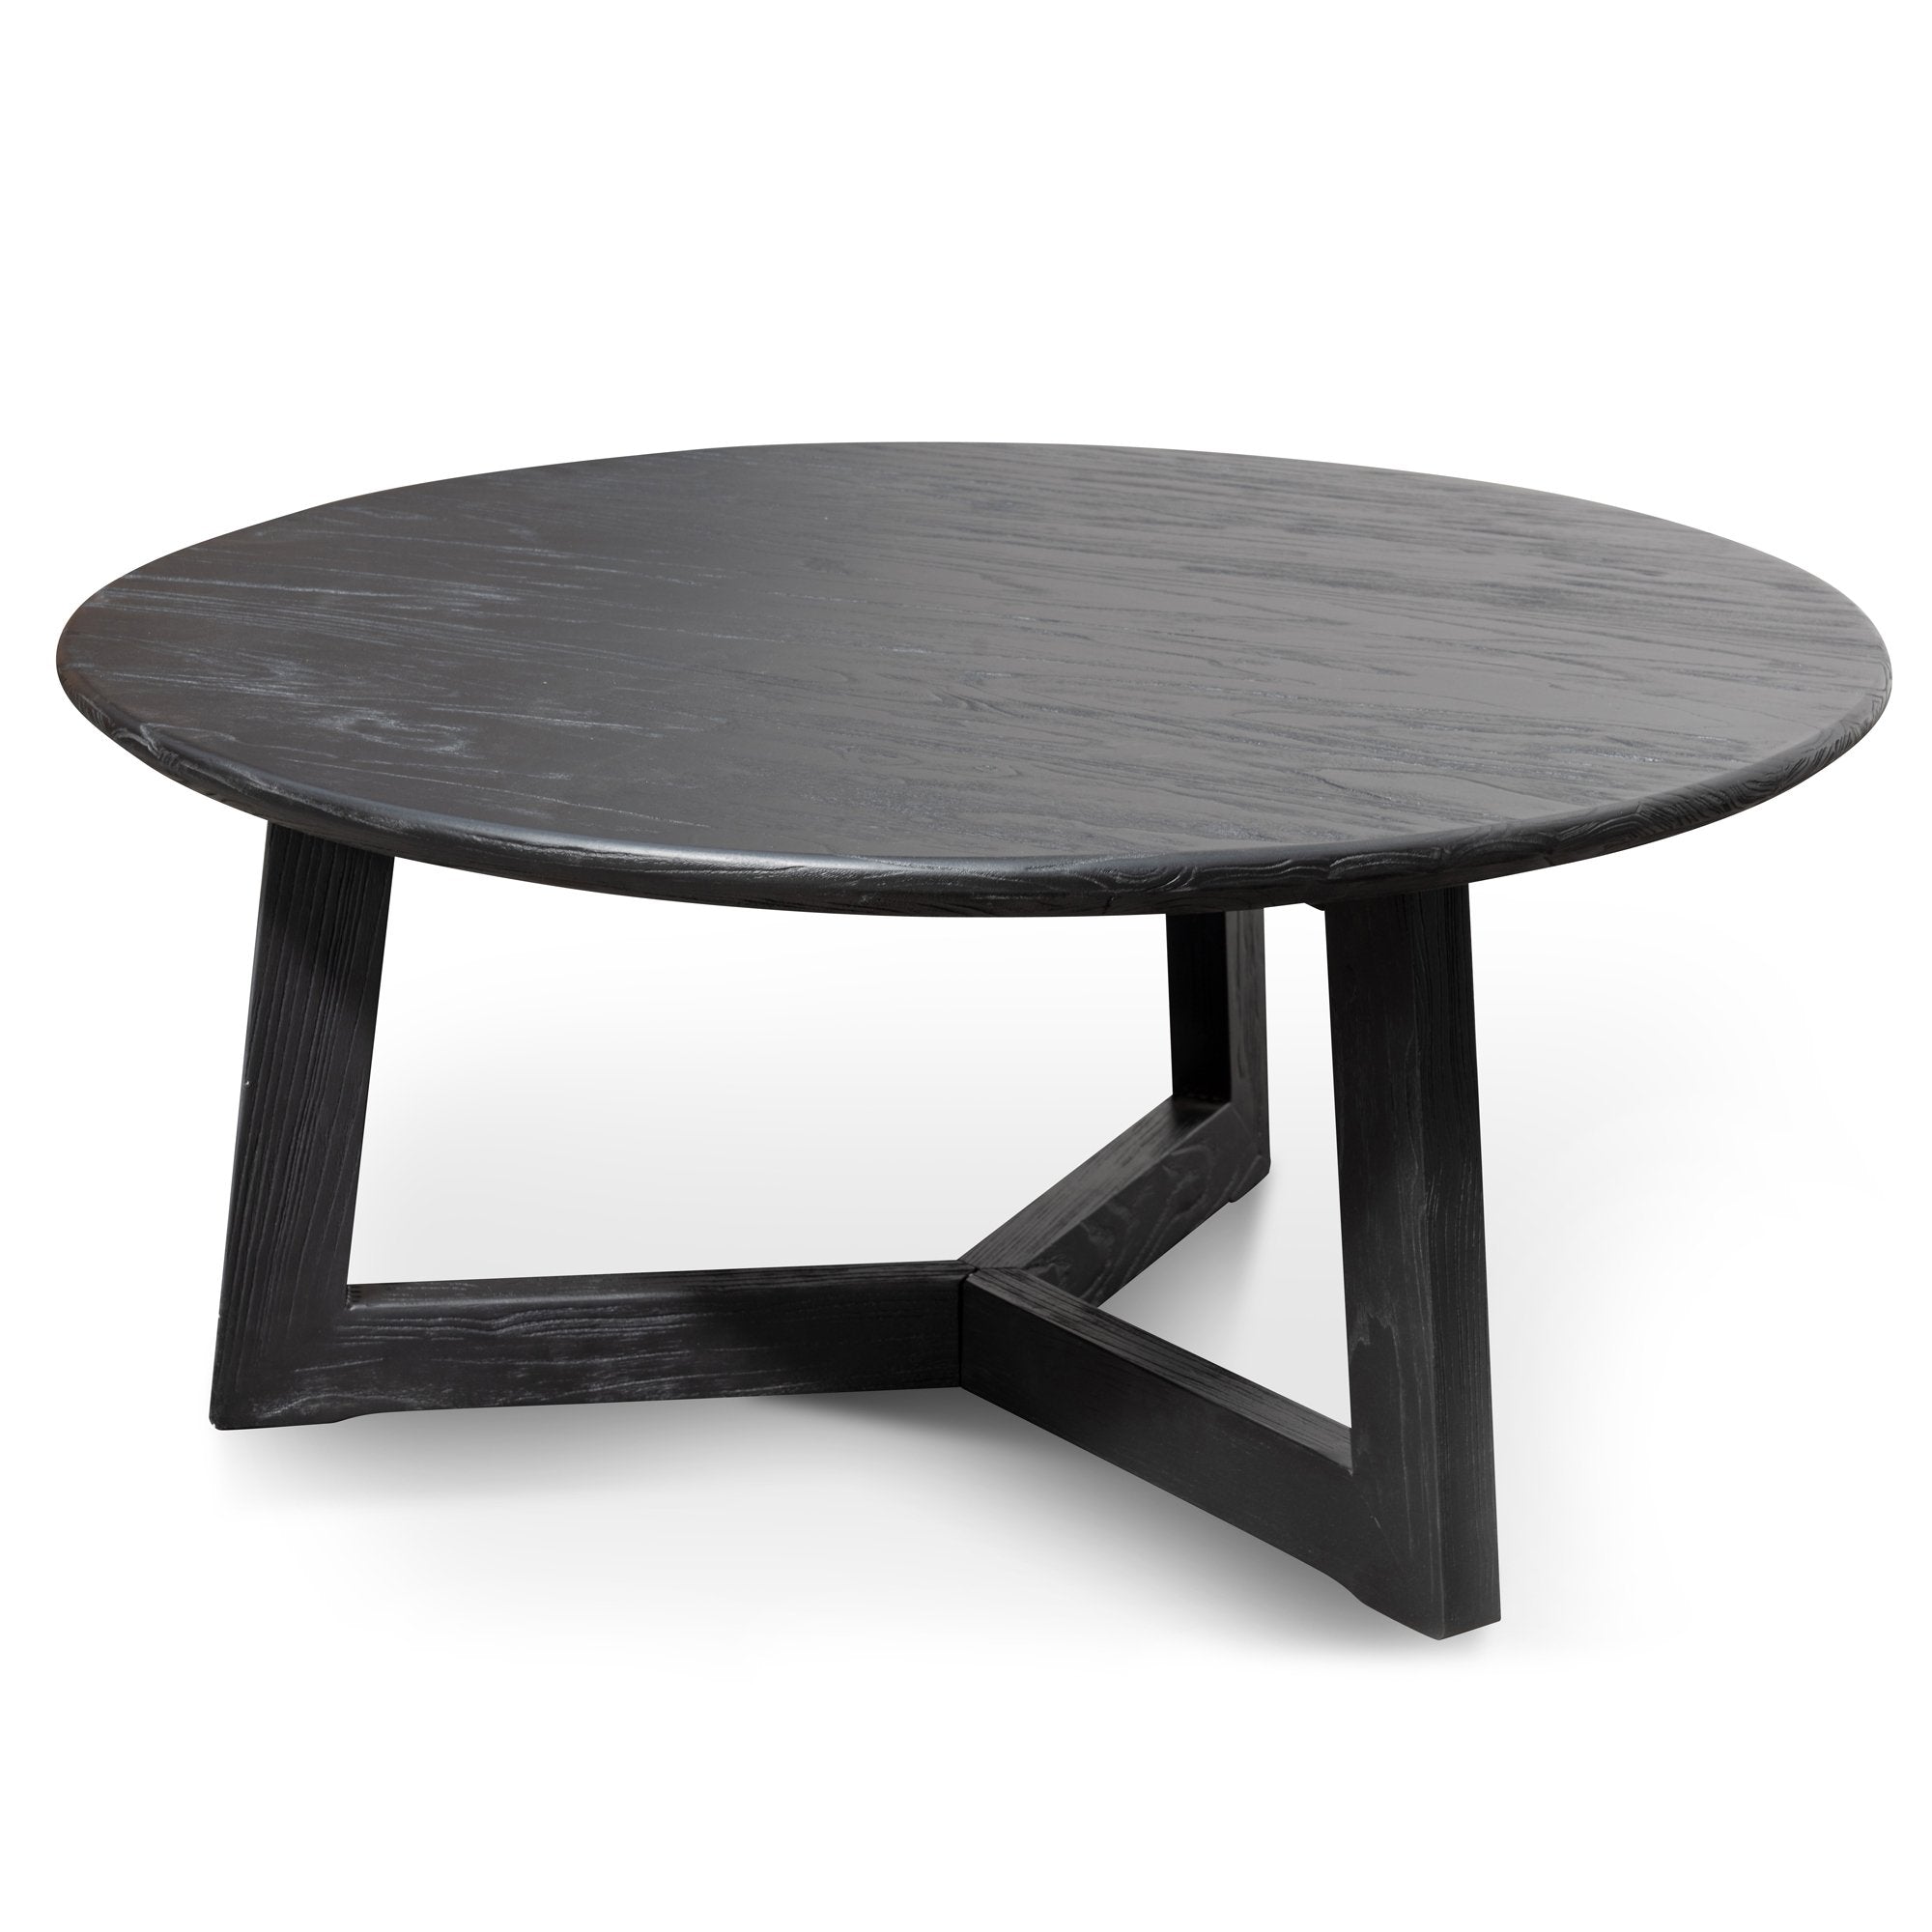 Elise Wooden Round Coffee Table - Coffee Table